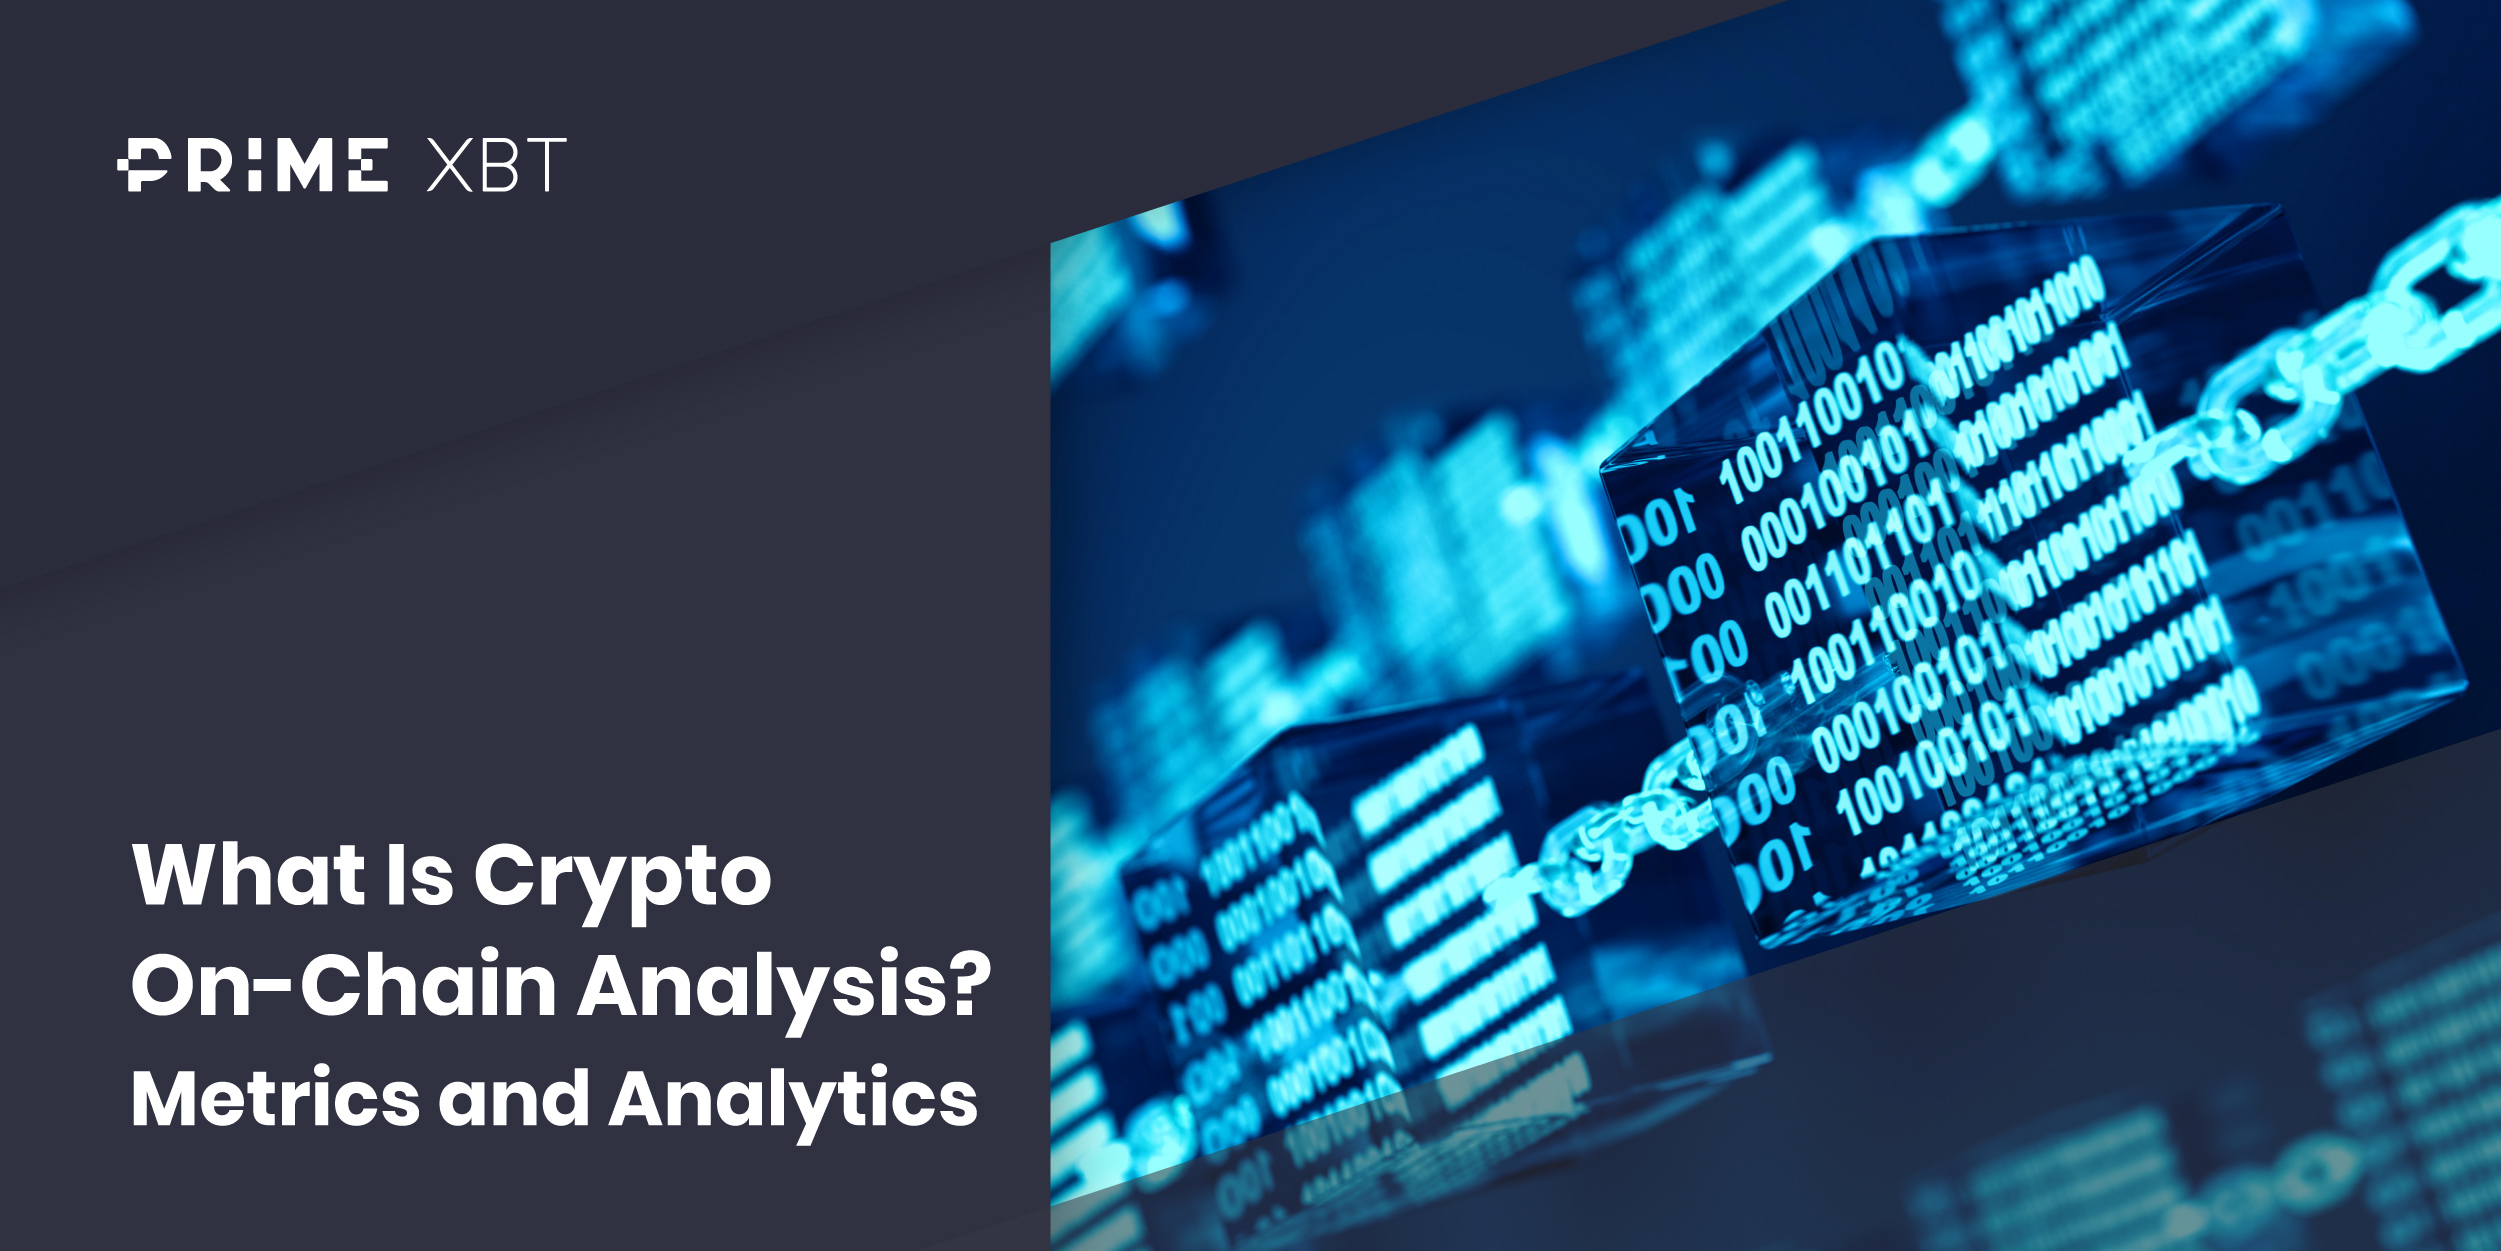 What Is Crypto On-Chain Analysis? – Definition & Meaning  - blog 205 2